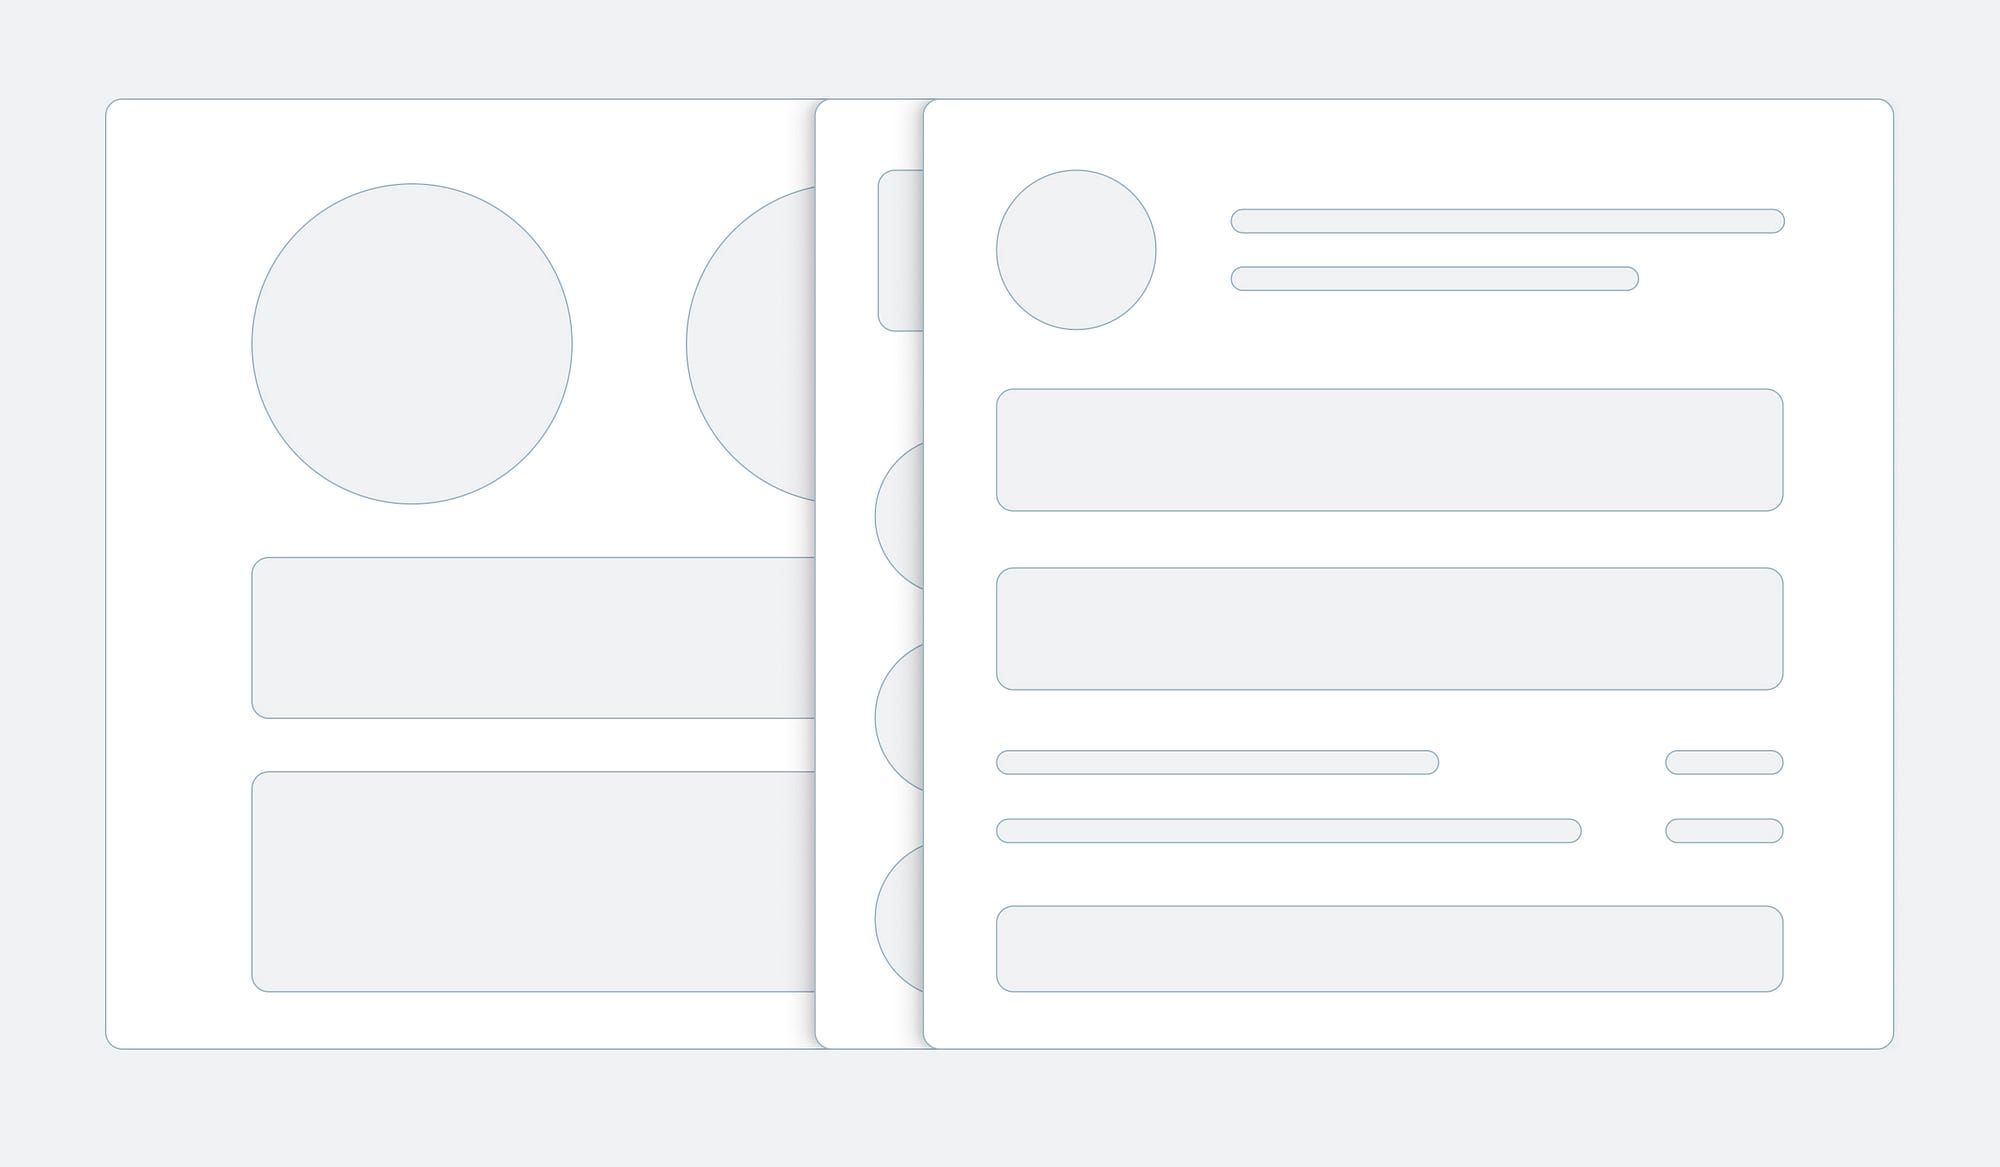 Layers of UI elements with differing shadows